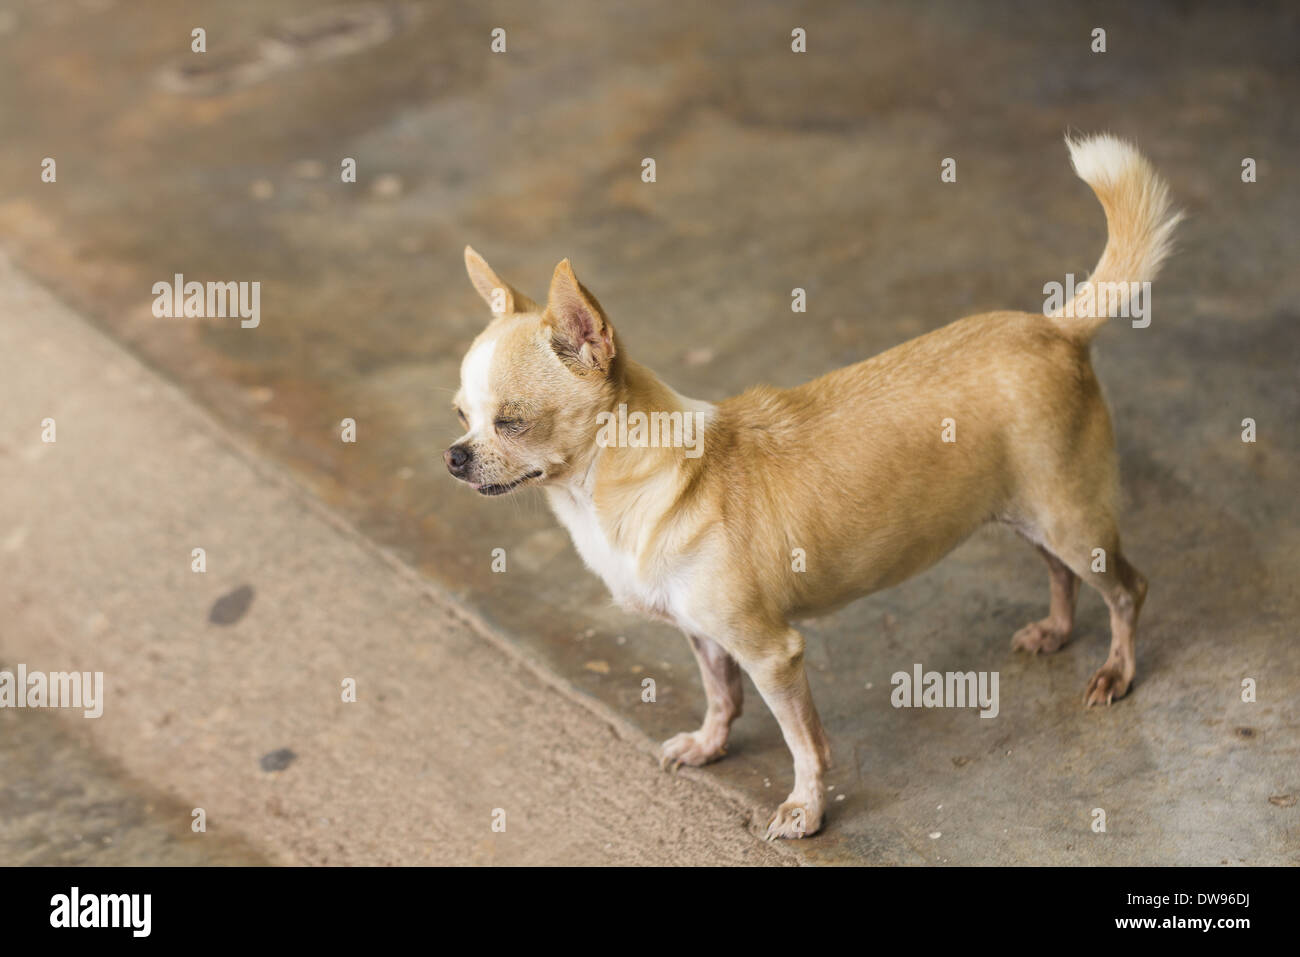 Chihuahua poil court femelle chien Photo Stock - Alamy